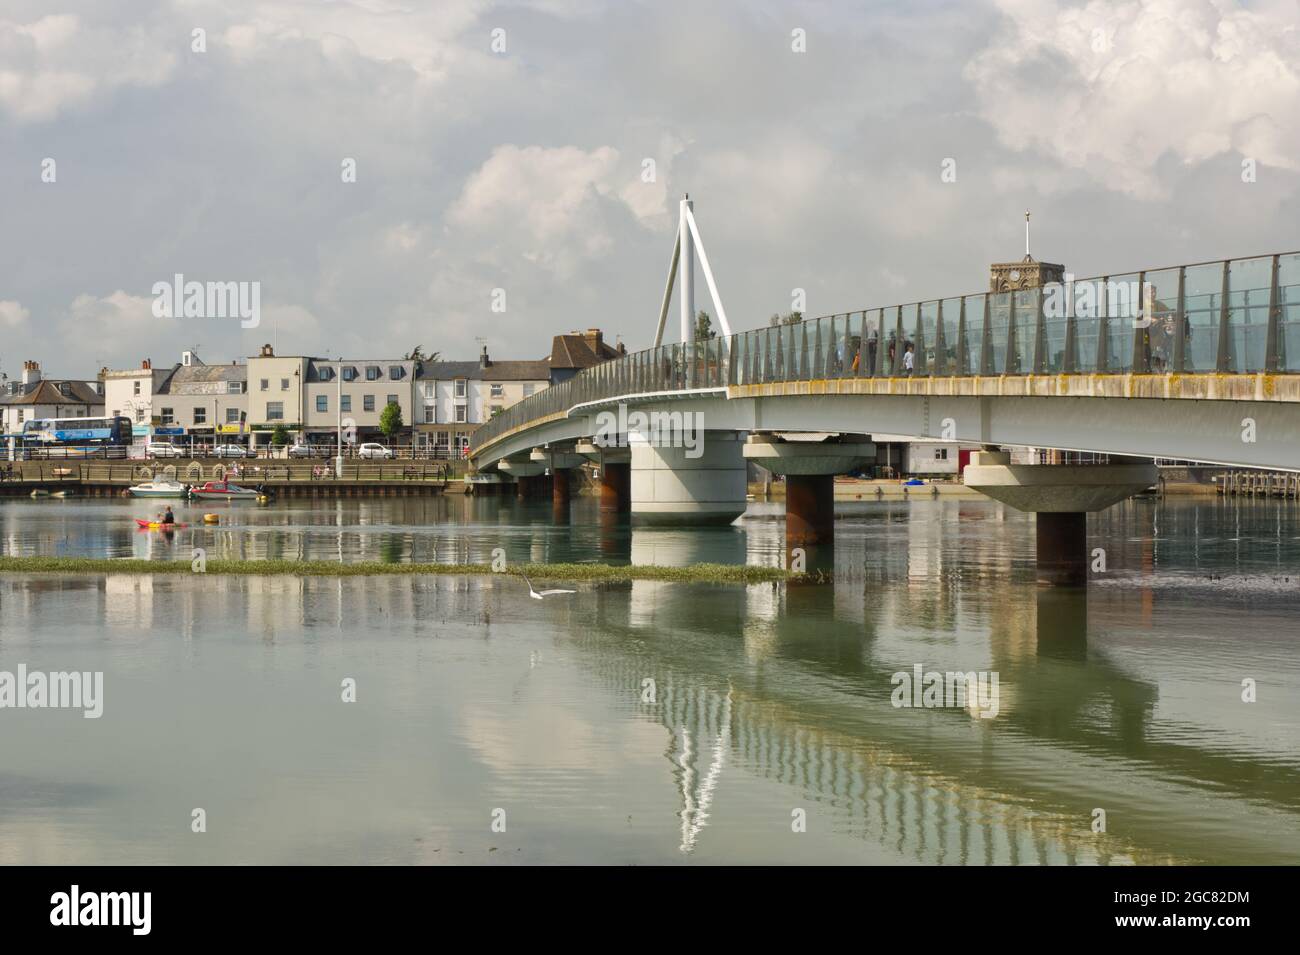 Footbridge over River Adur at Shoreham, West Sussex, England. With town behind and people walking around. Stock Photo